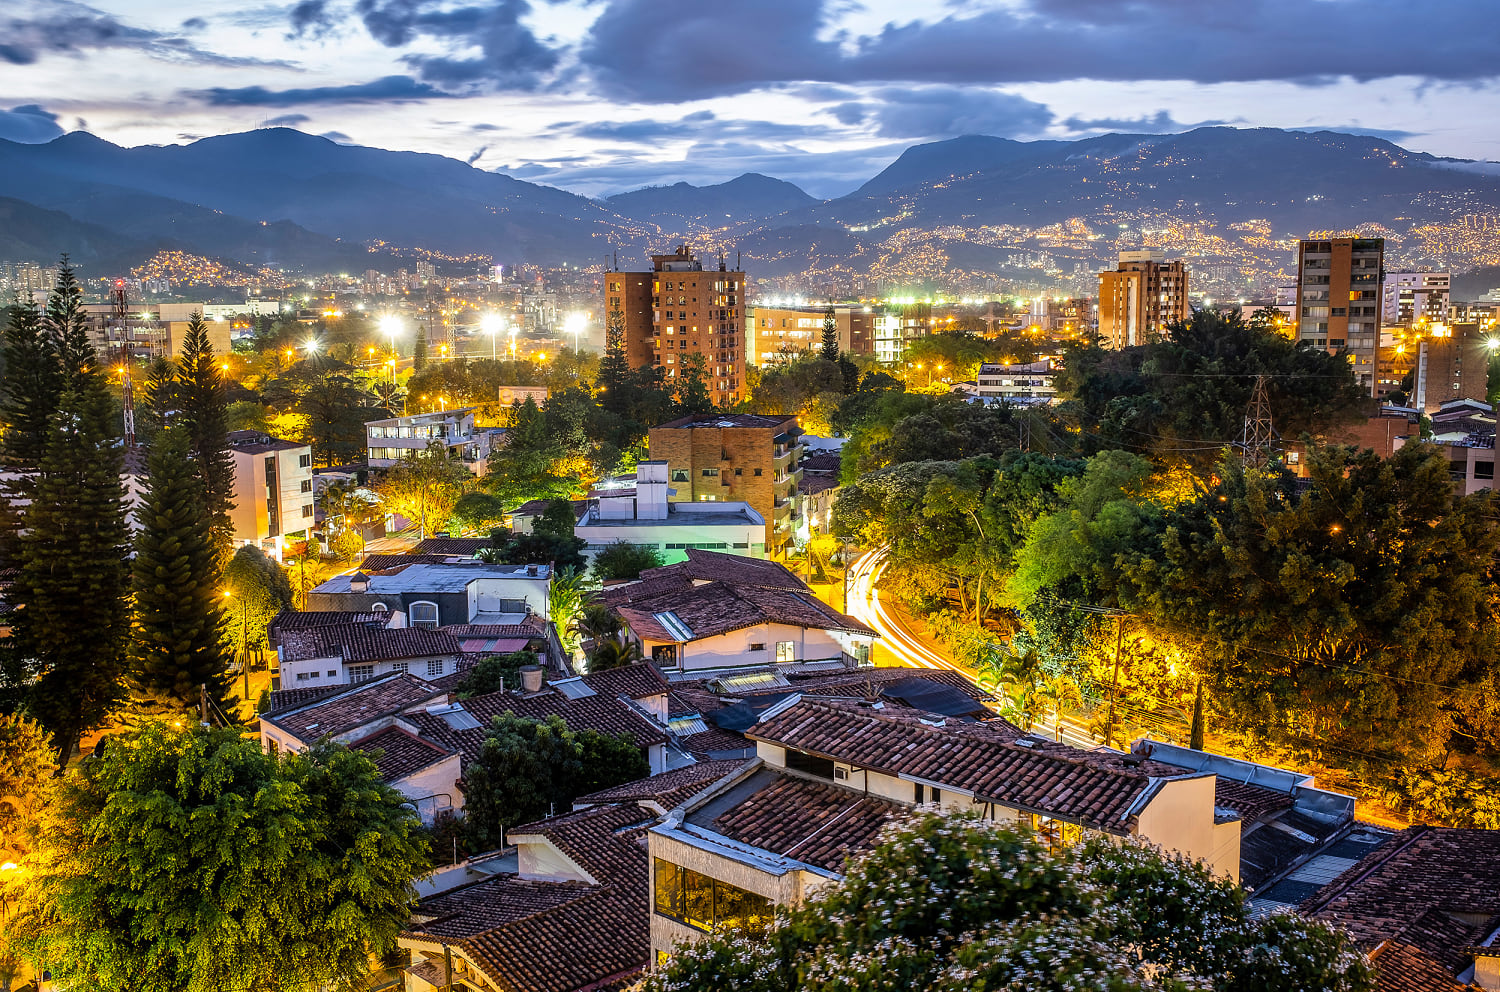 Medellín, Colombia, bans sex work in two areas after U.S. tourist found with minors